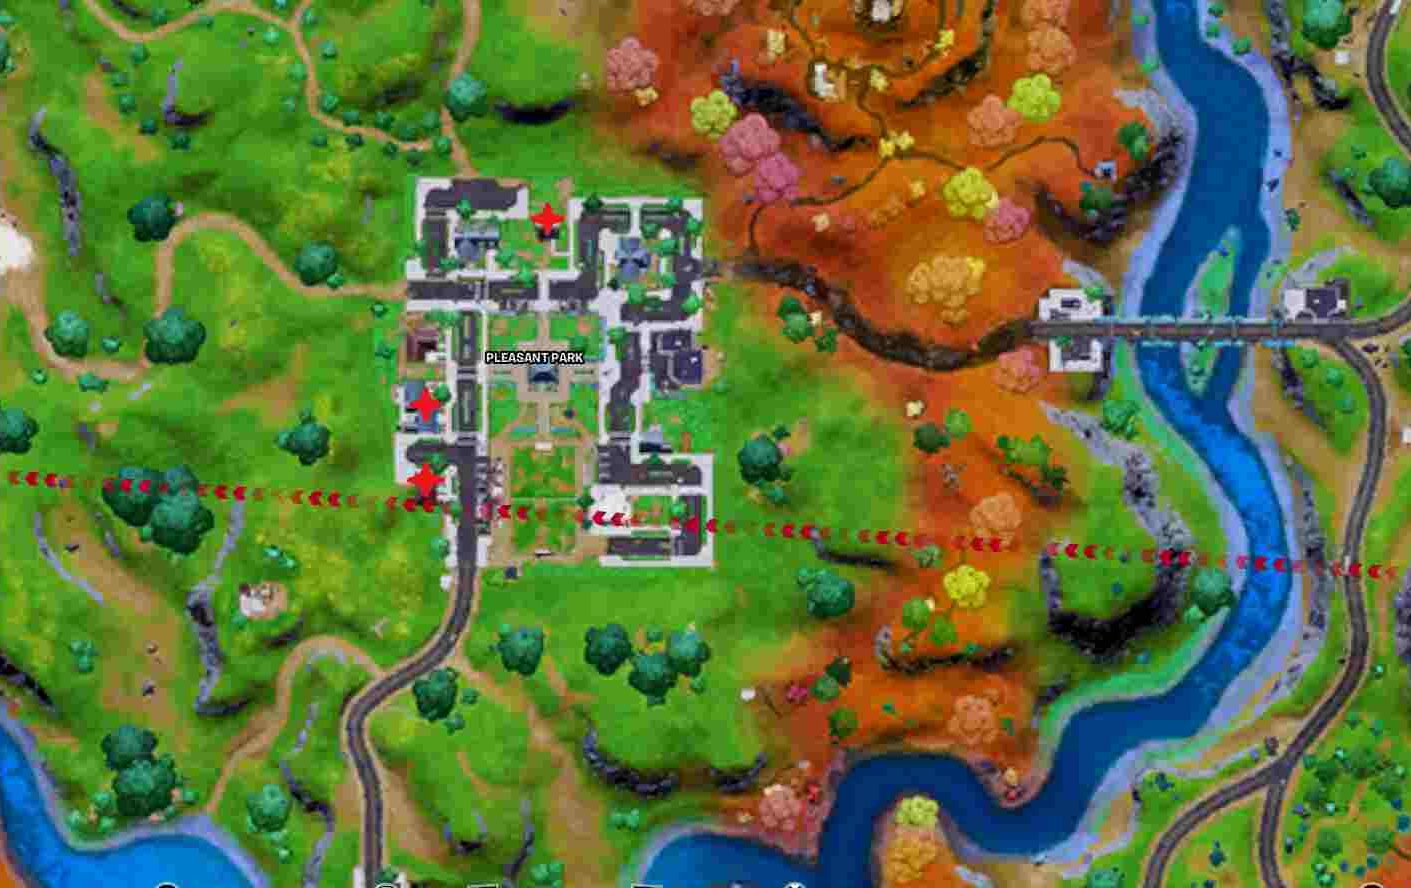 Locations of Research Books in Pleasant Park